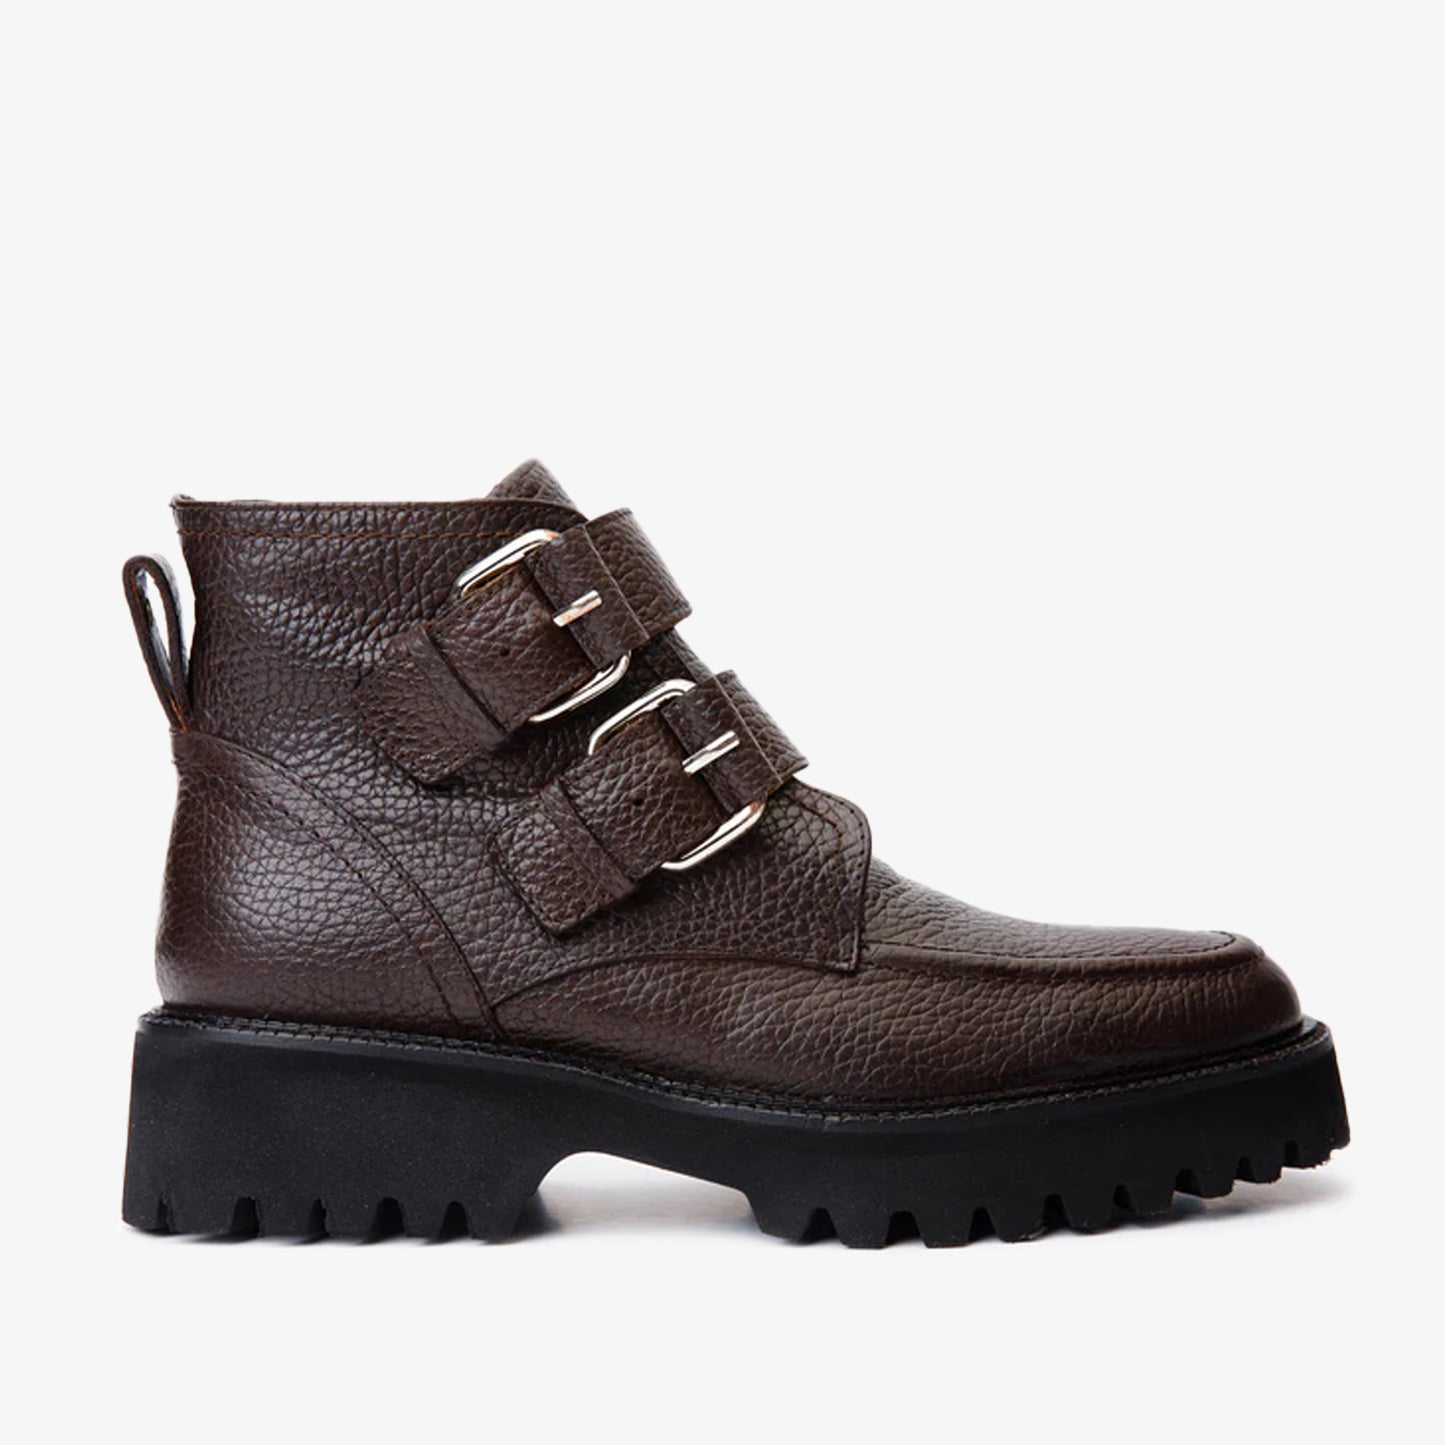 The Harry Brown Leather Double Monk Ankle Women Boot